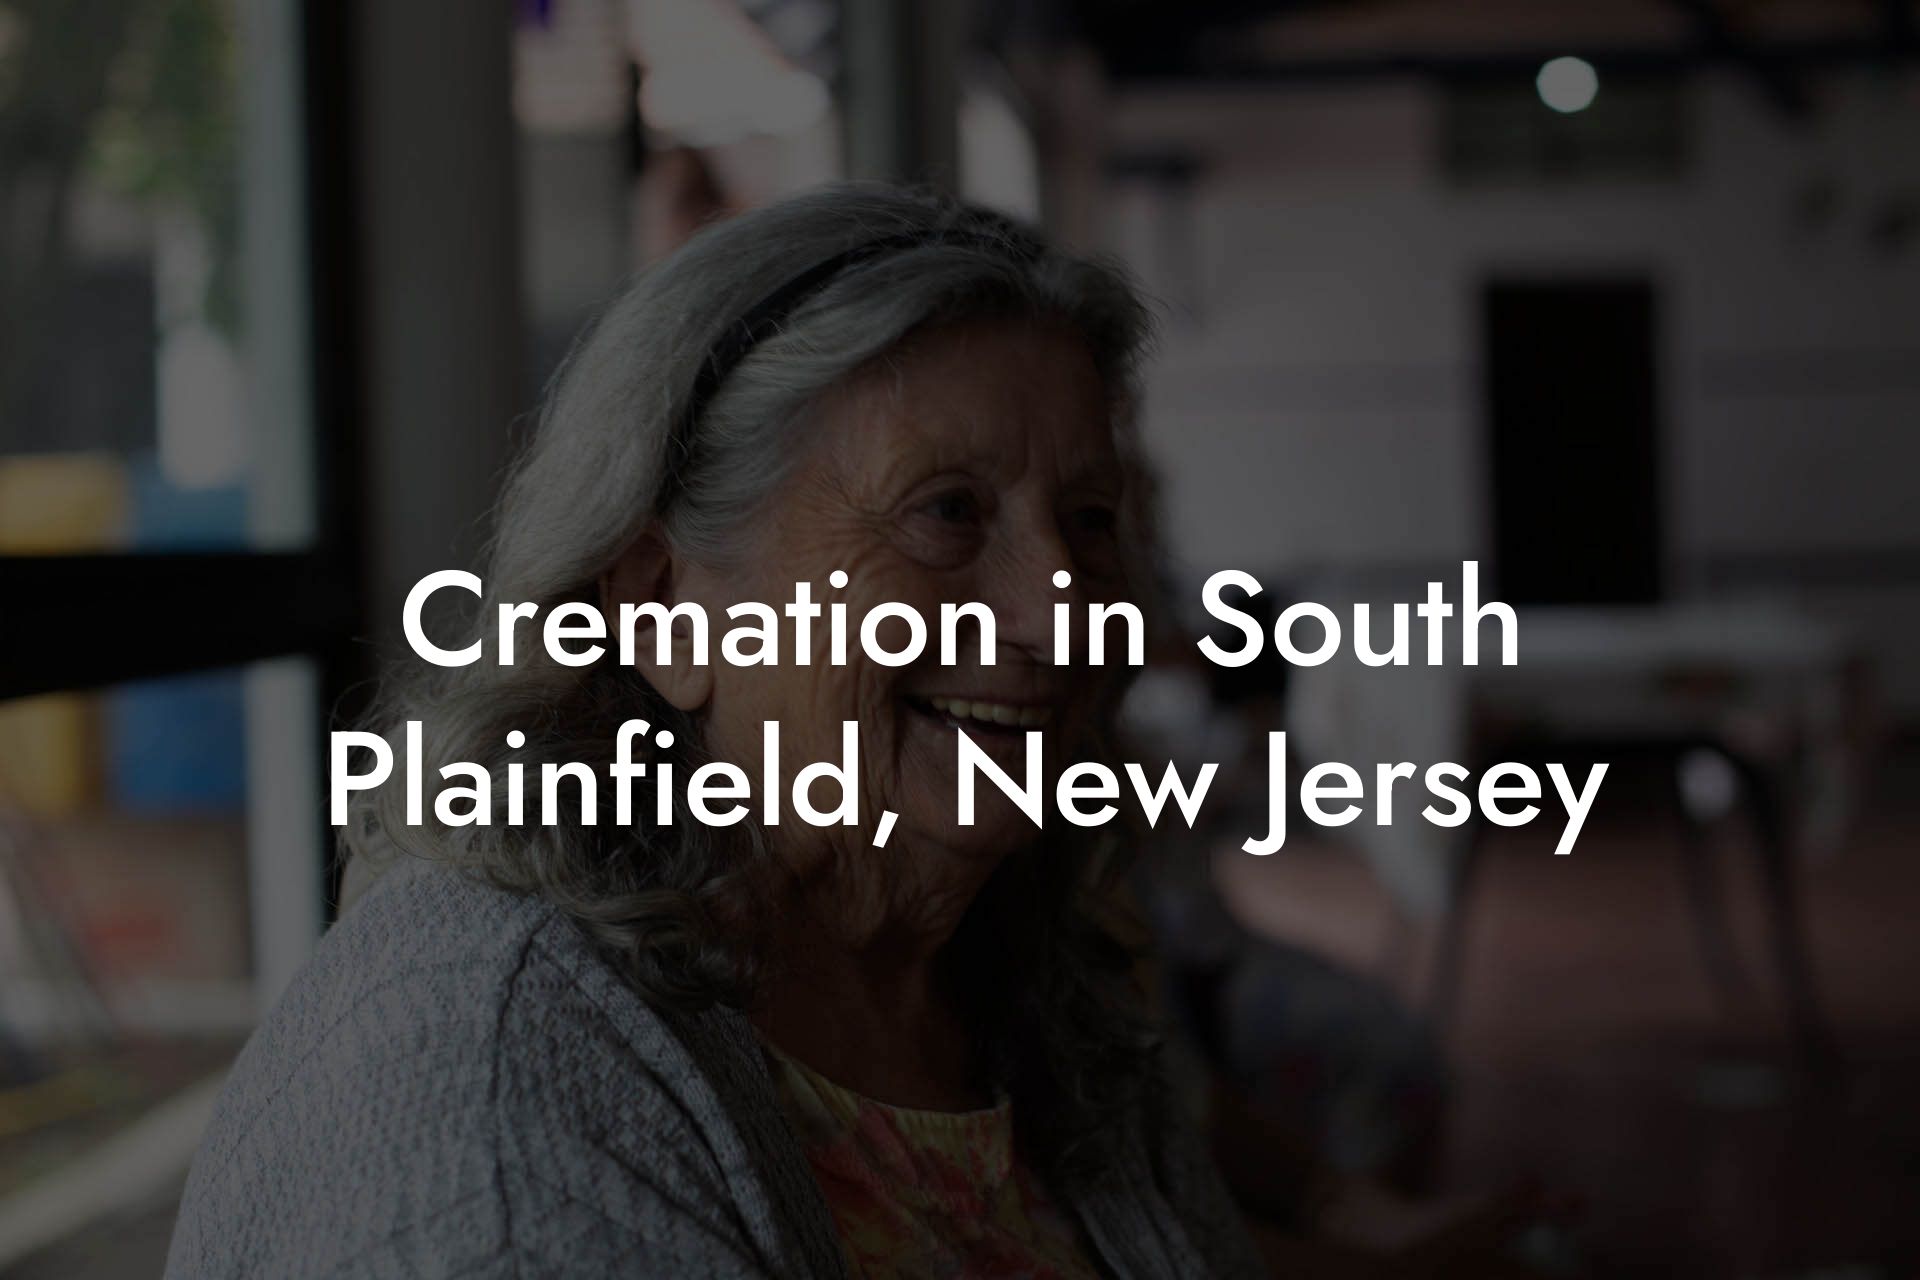 Cremation in South Plainfield, New Jersey